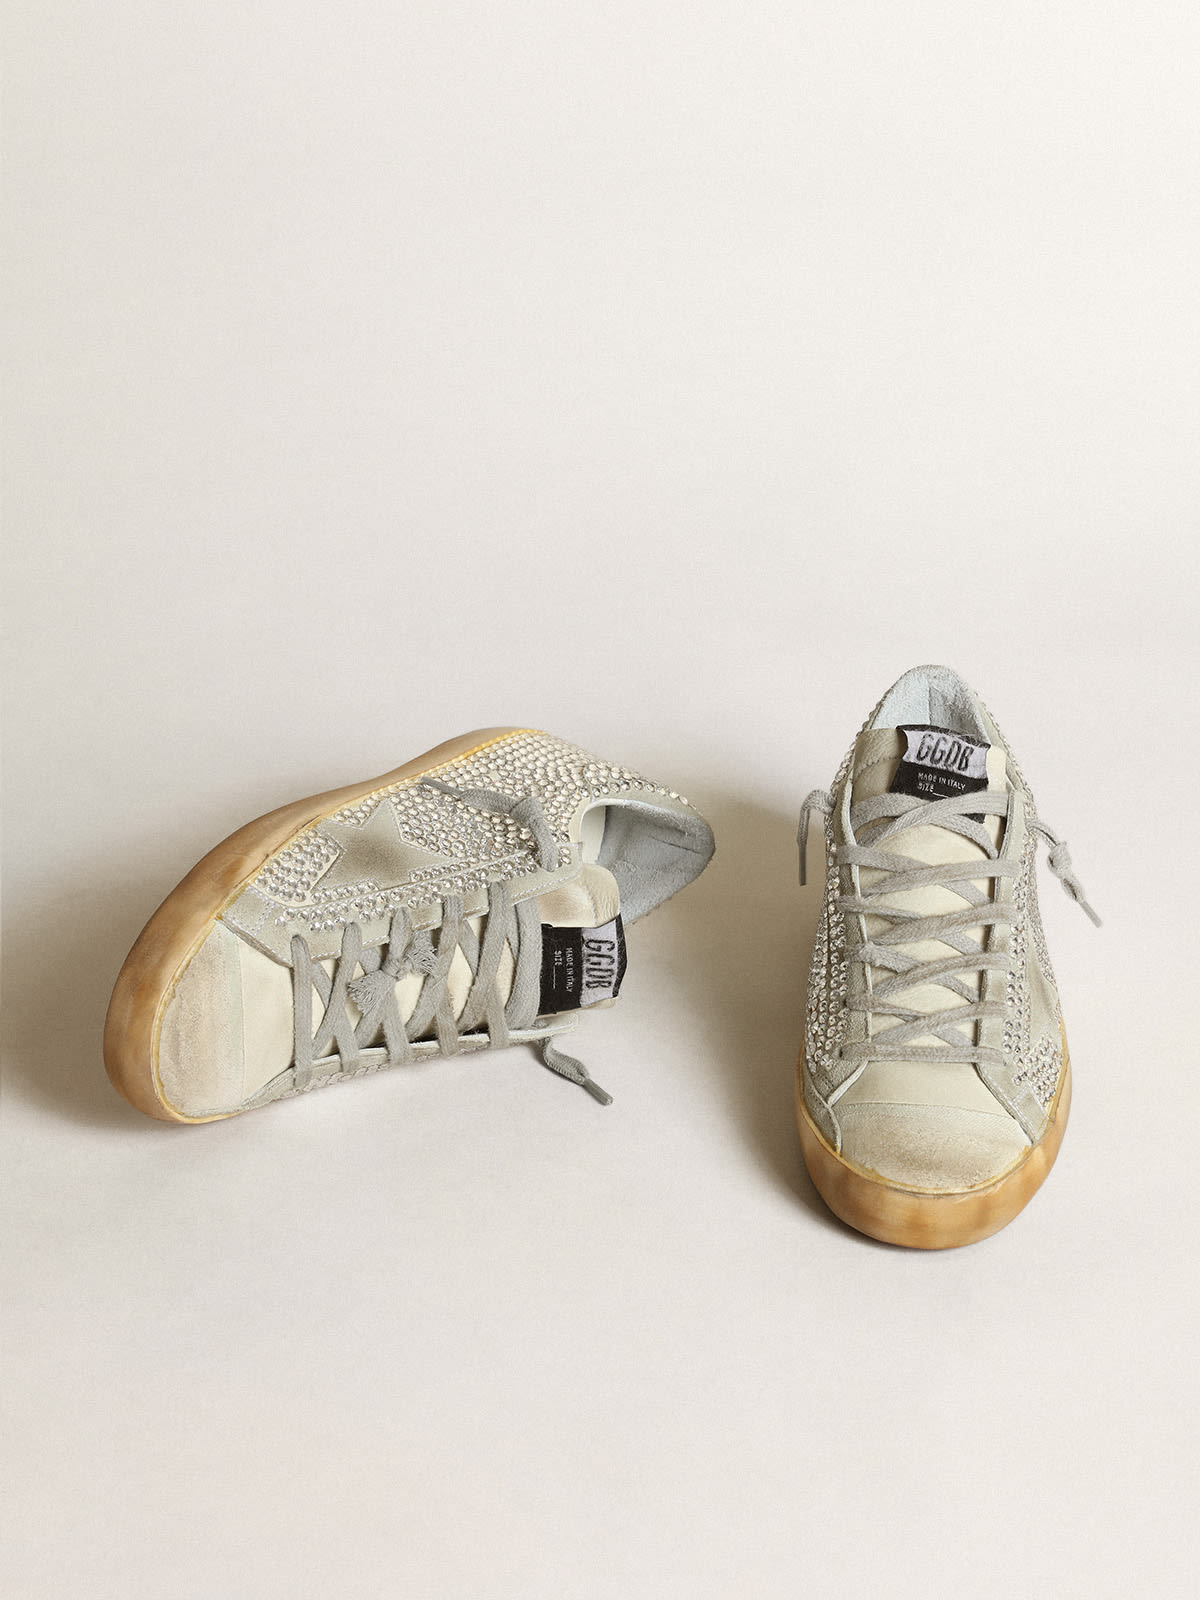 Golden Goose - Super-star sneakers in off-white nubuck and silver Swarovski crystals with ice-gray suede star in 